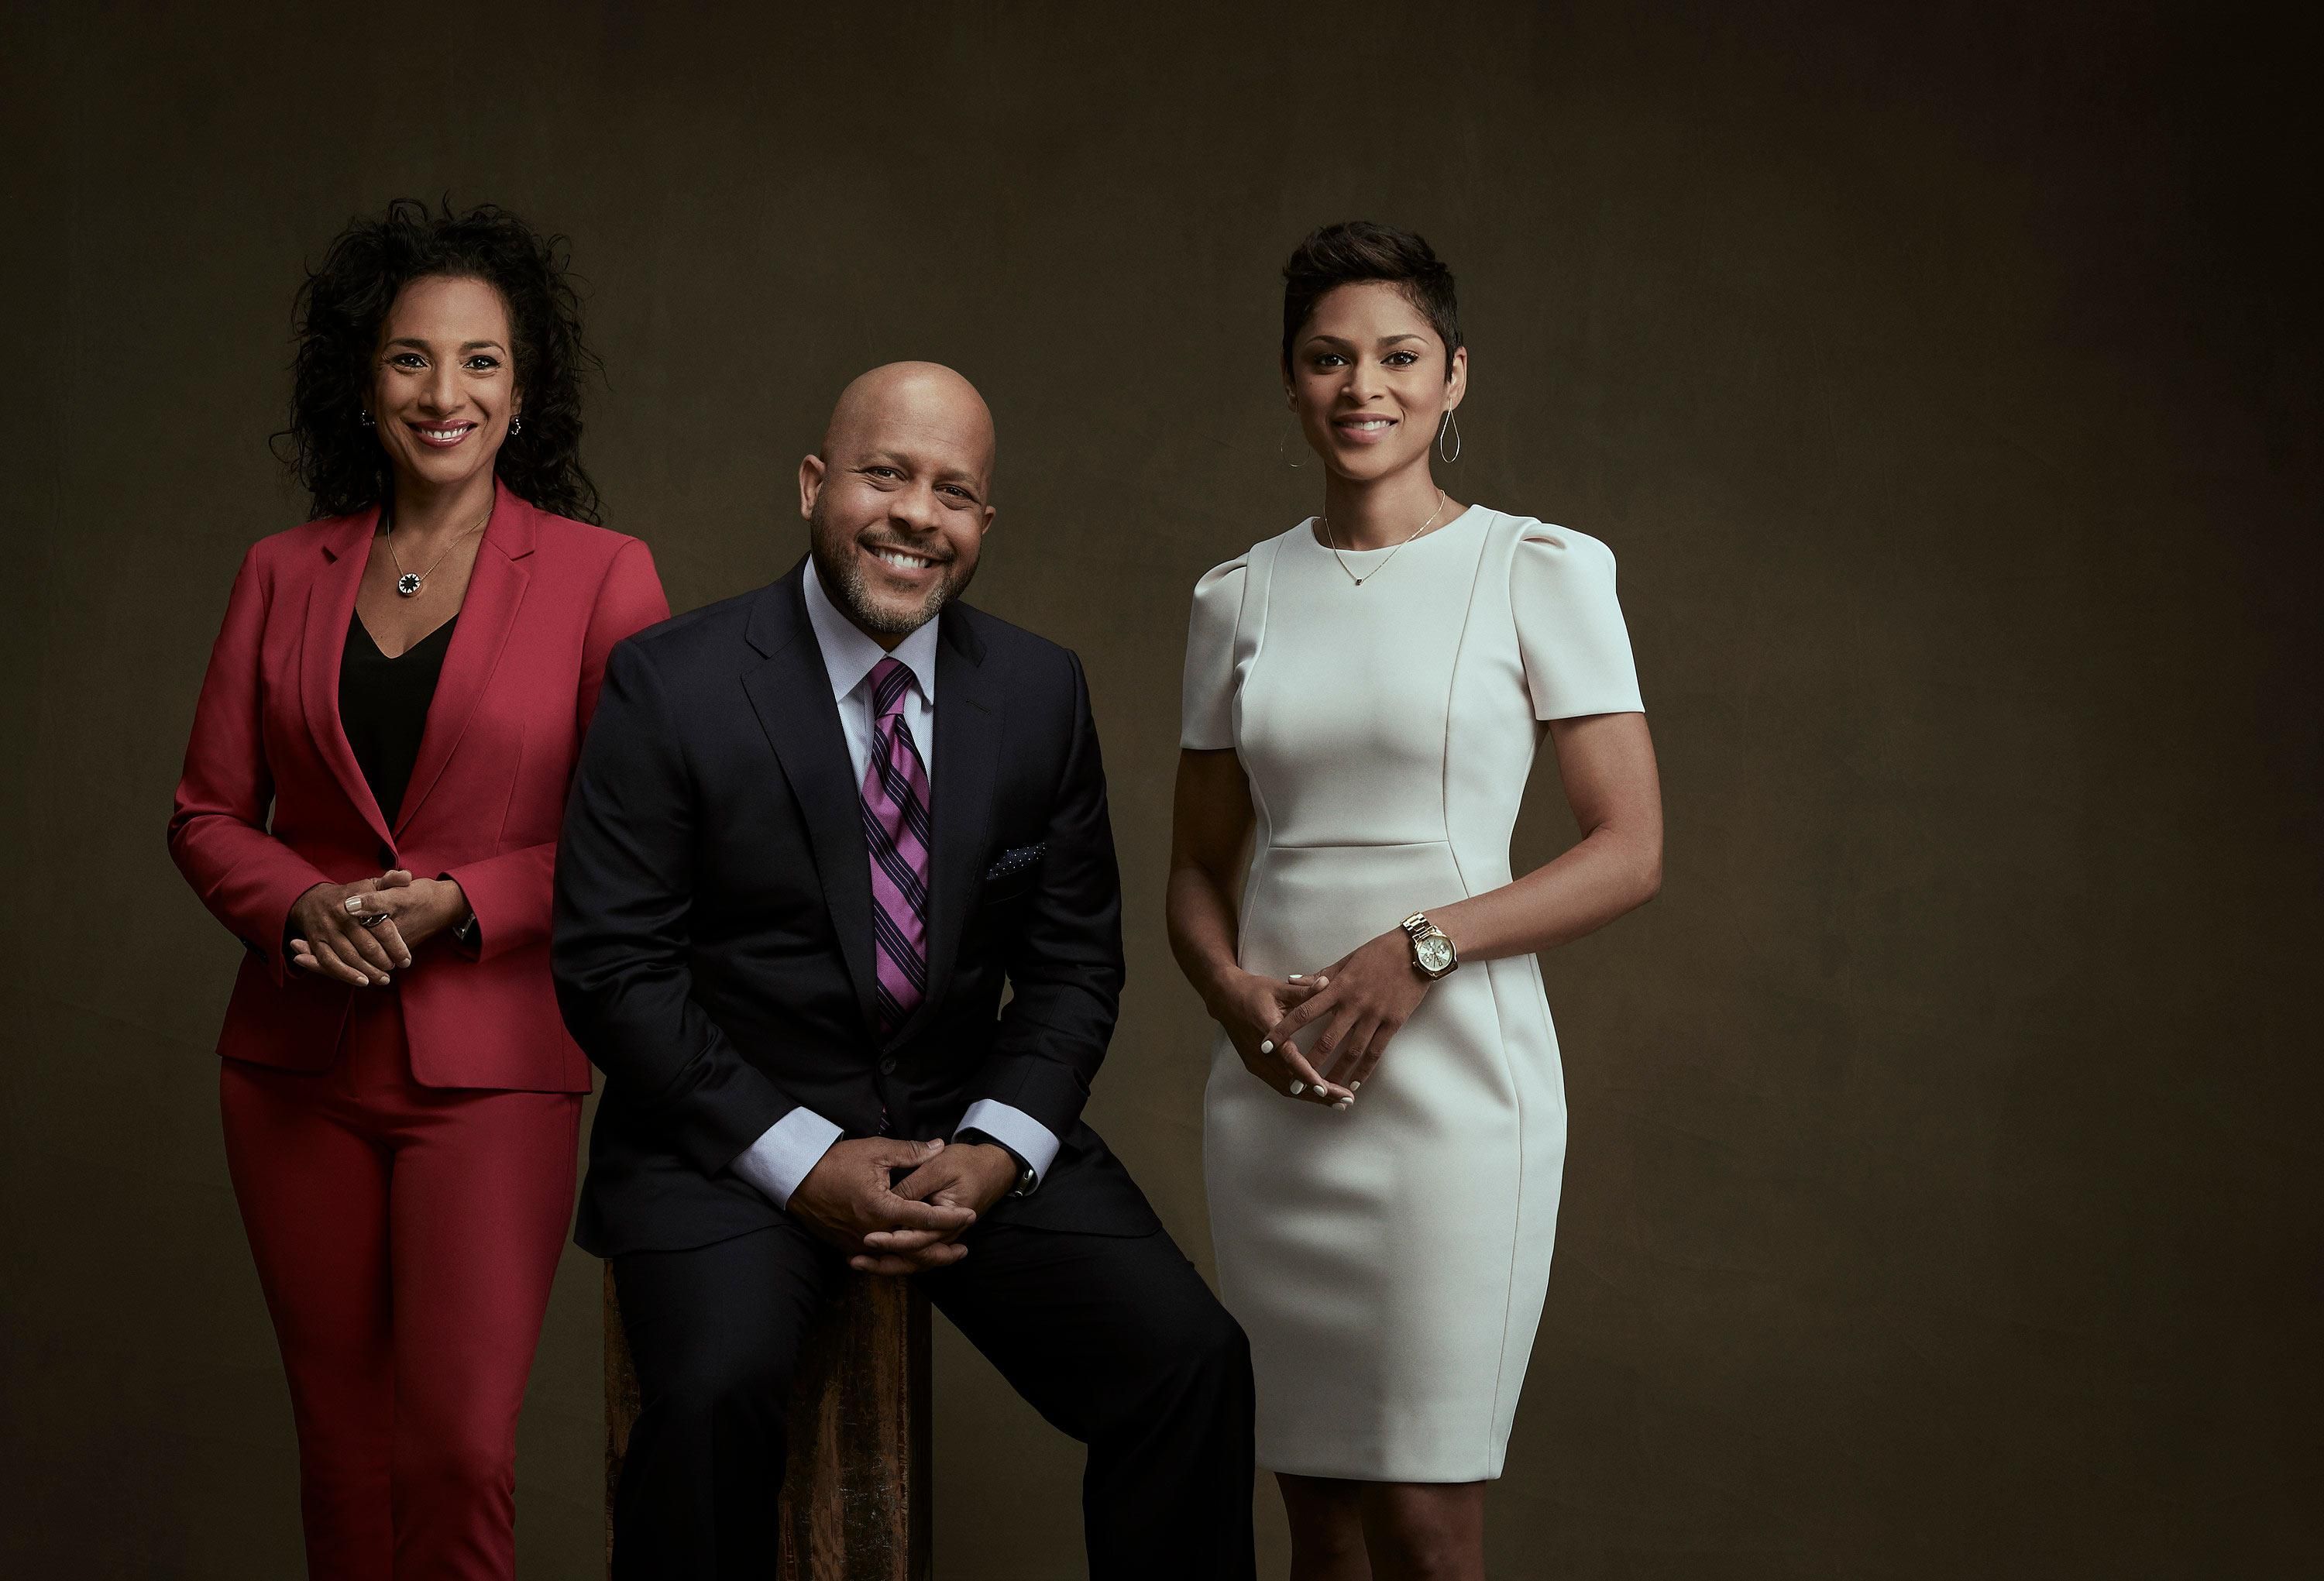 Getting To Know CBS News Correspondents Michelle Miller, Jeff Pegues, And Jericka Duncan